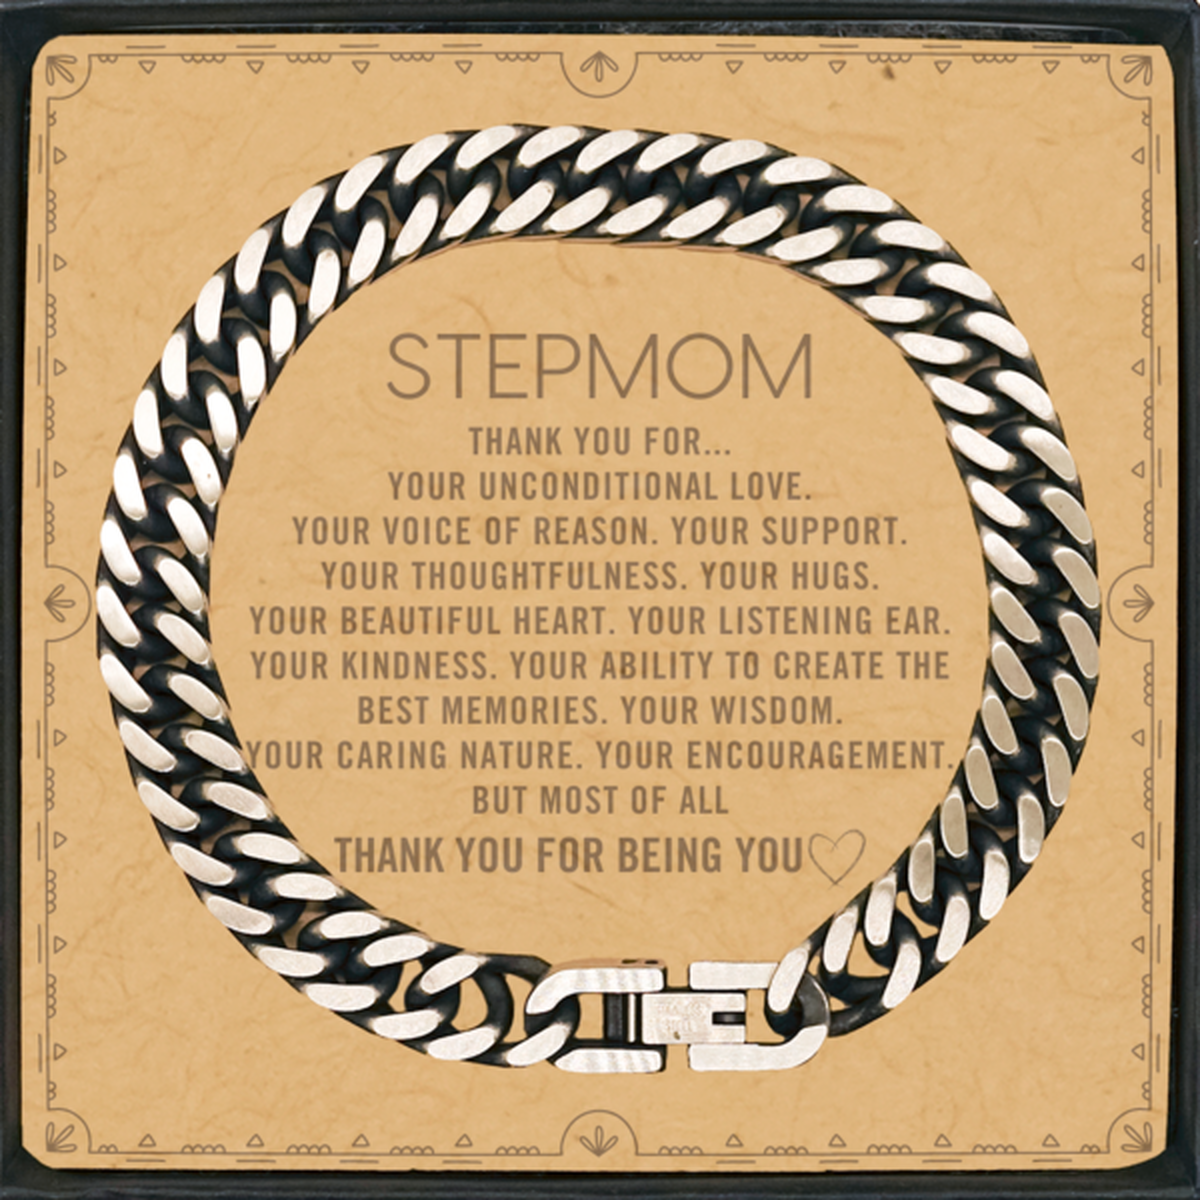 Stepmom Cuban Link Chain Bracelet Custom, Message Card Gifts For Stepmom Christmas Graduation Birthday Gifts for Men Women Stepmom Thank you for Your unconditional love